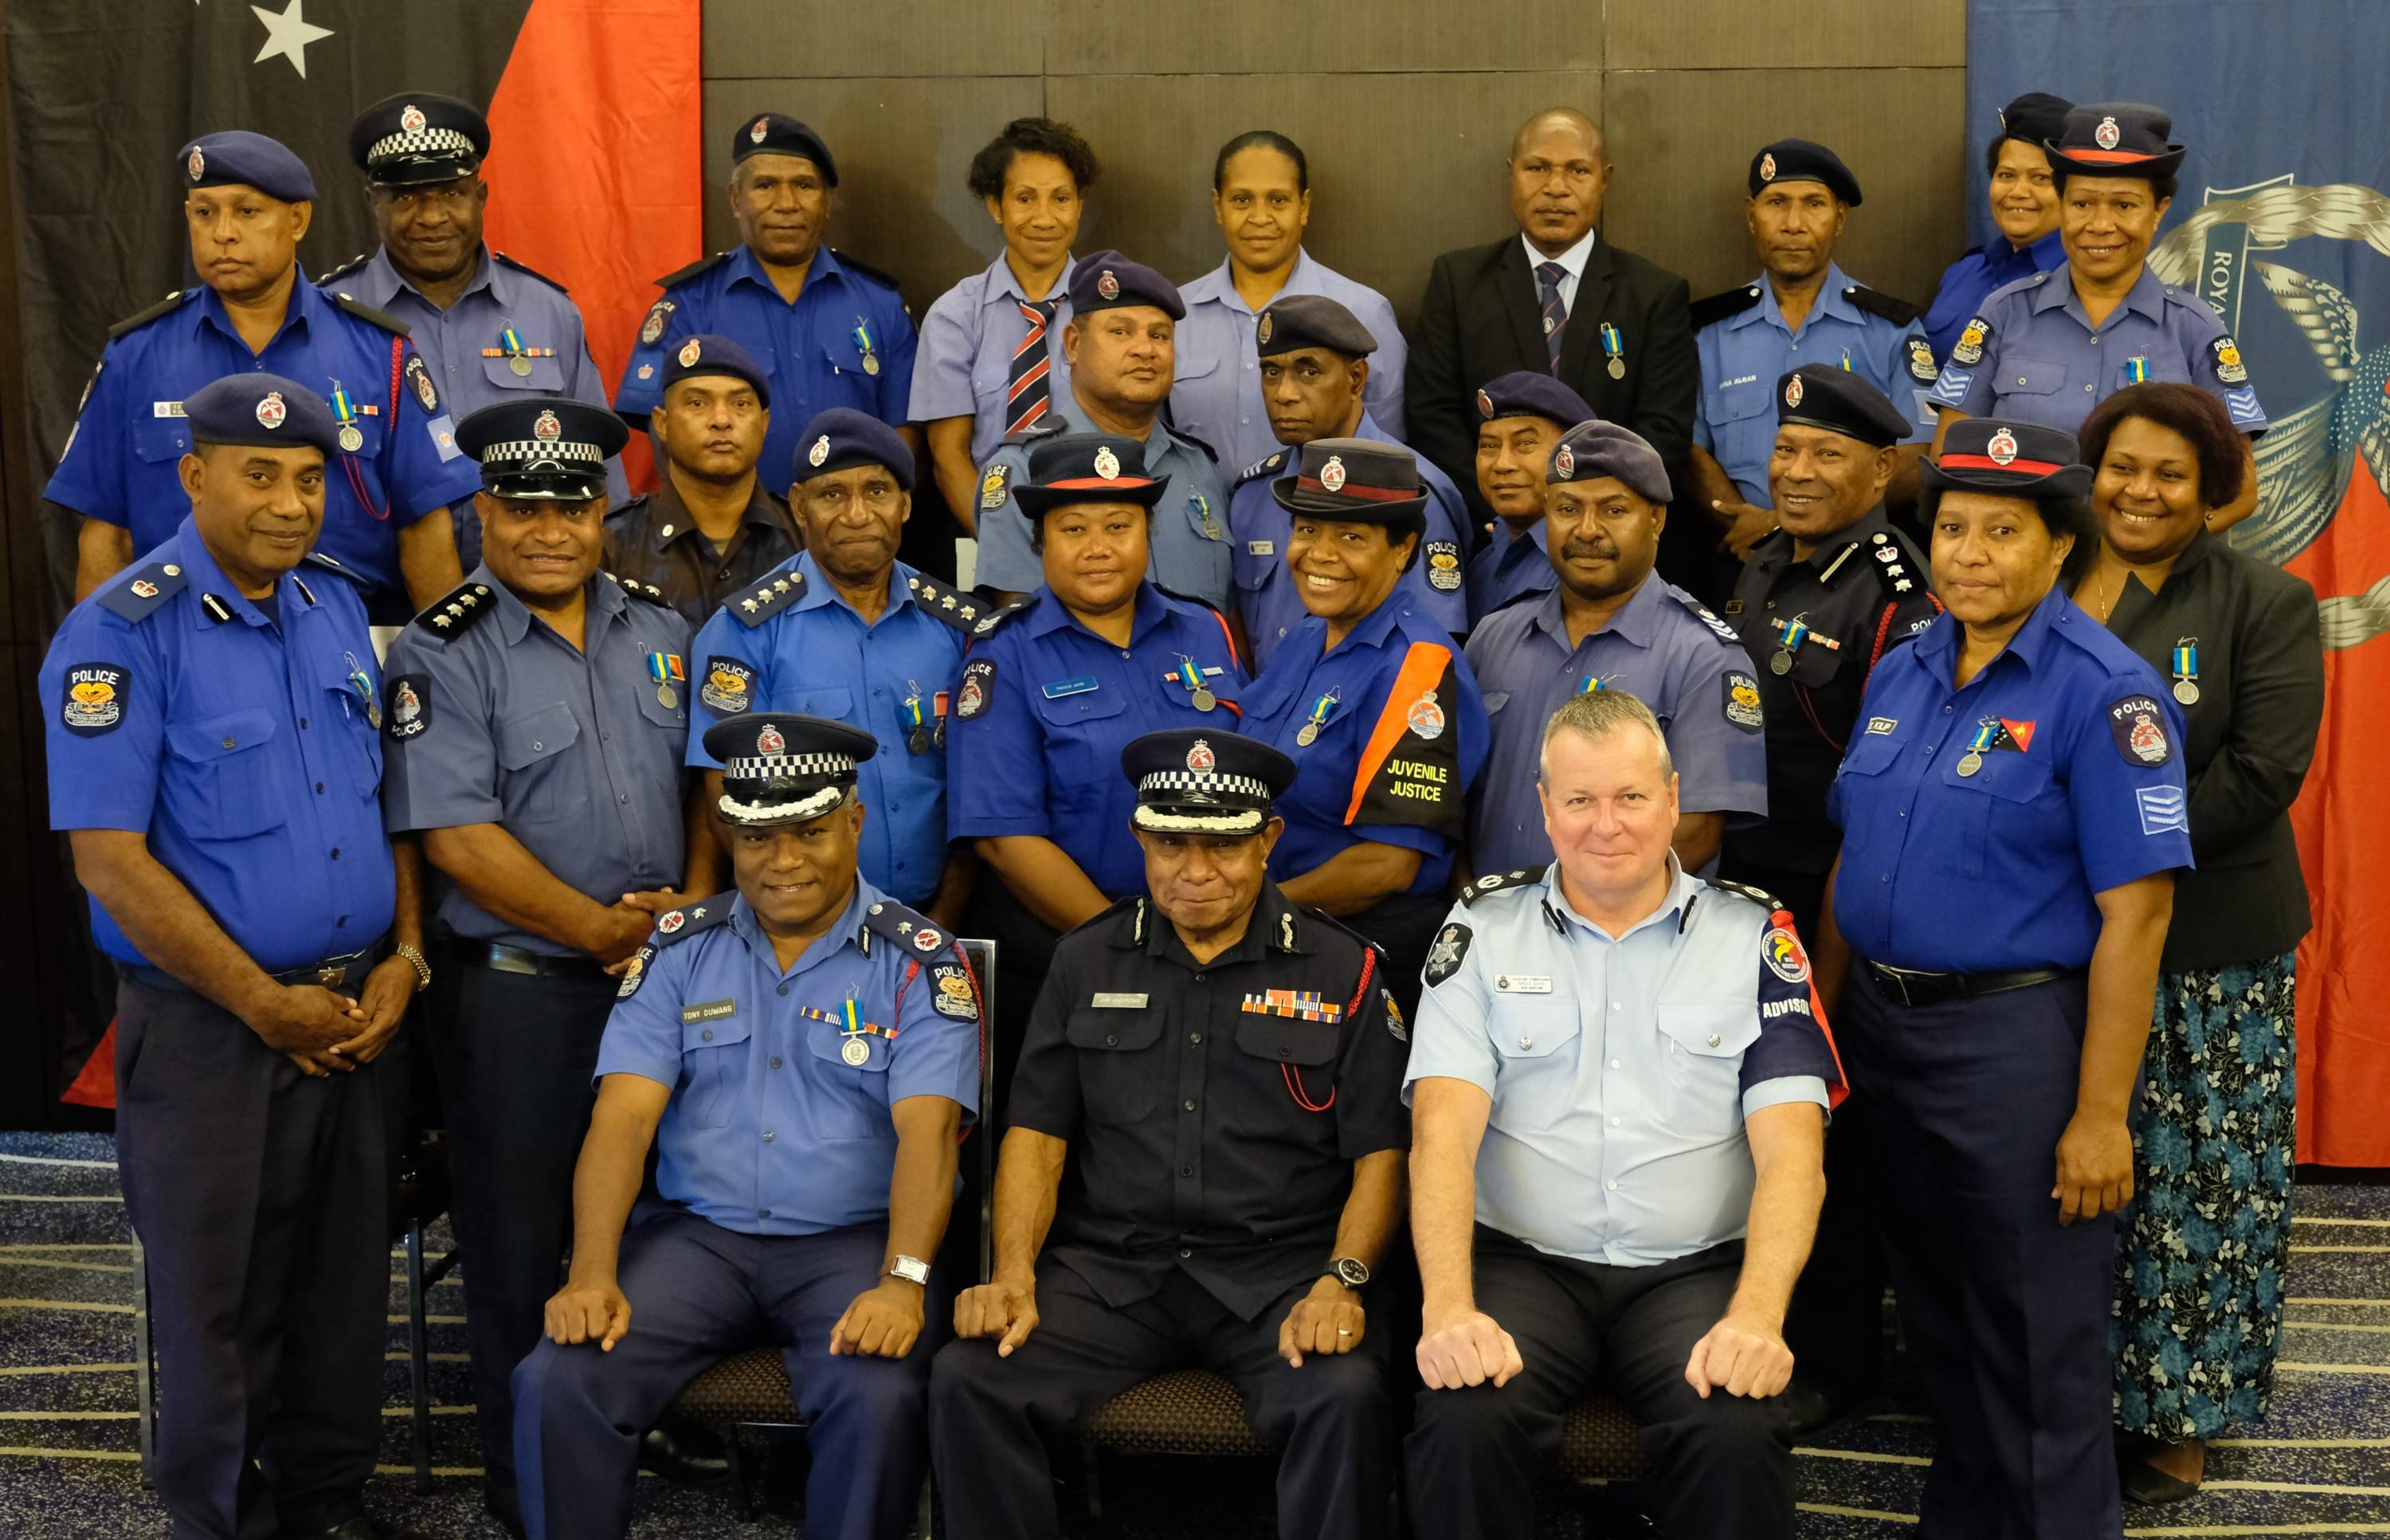 Seated from left is Assistant Commissioner of Police Logistics Tonny Duwang, Deputy Commissioner of Police and Chief of Operations Jim Andrews and Mission Commander of the PNG-Australia Policing Partnership Assistant Commissioner of Police Bruce Giles with the recipients of the  Royal Solomon Islands Police&#039;s International Law Enforcement Cooperation Medal at the Stanley Hotel in Port Moresby on Monday, Aug 13